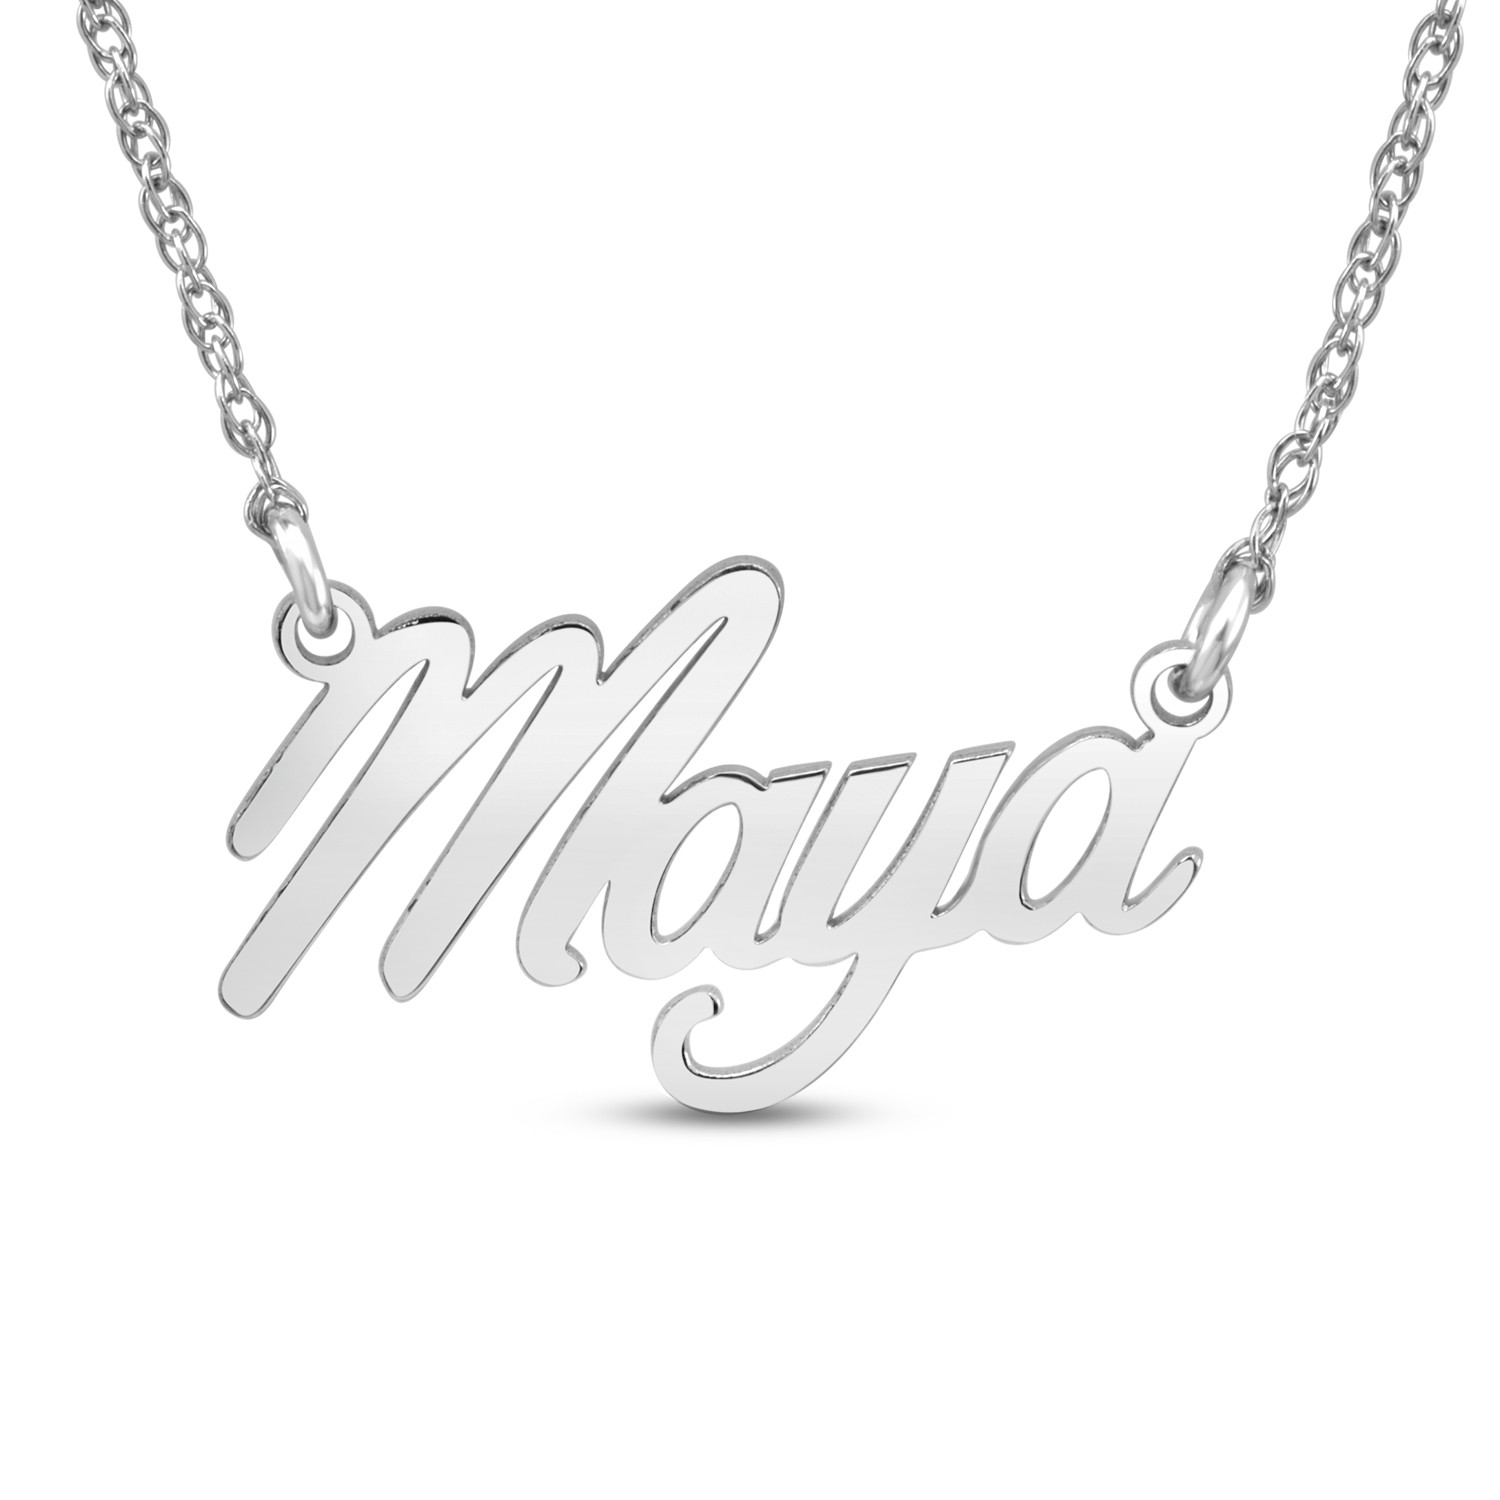 HI Polish Name Pers Necklace - 9 letter max 1 Uppercase letter (Example: Stephanie 12.06mm x 1.79" e=5.89mm)